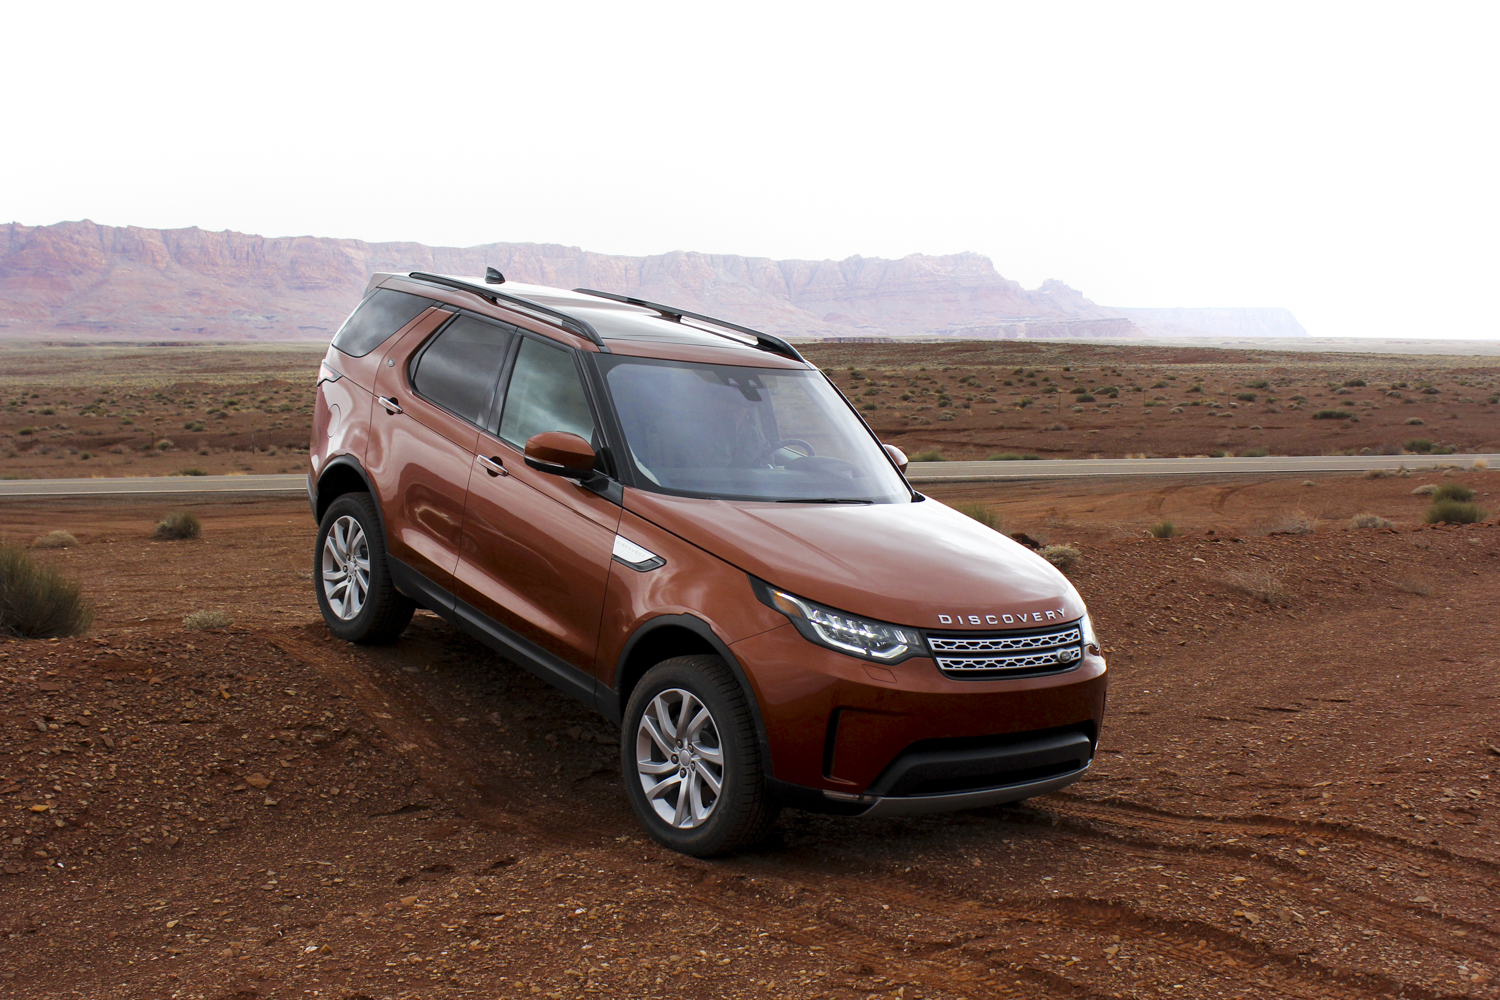 2017 land rover discovery first drive landrover review 000119